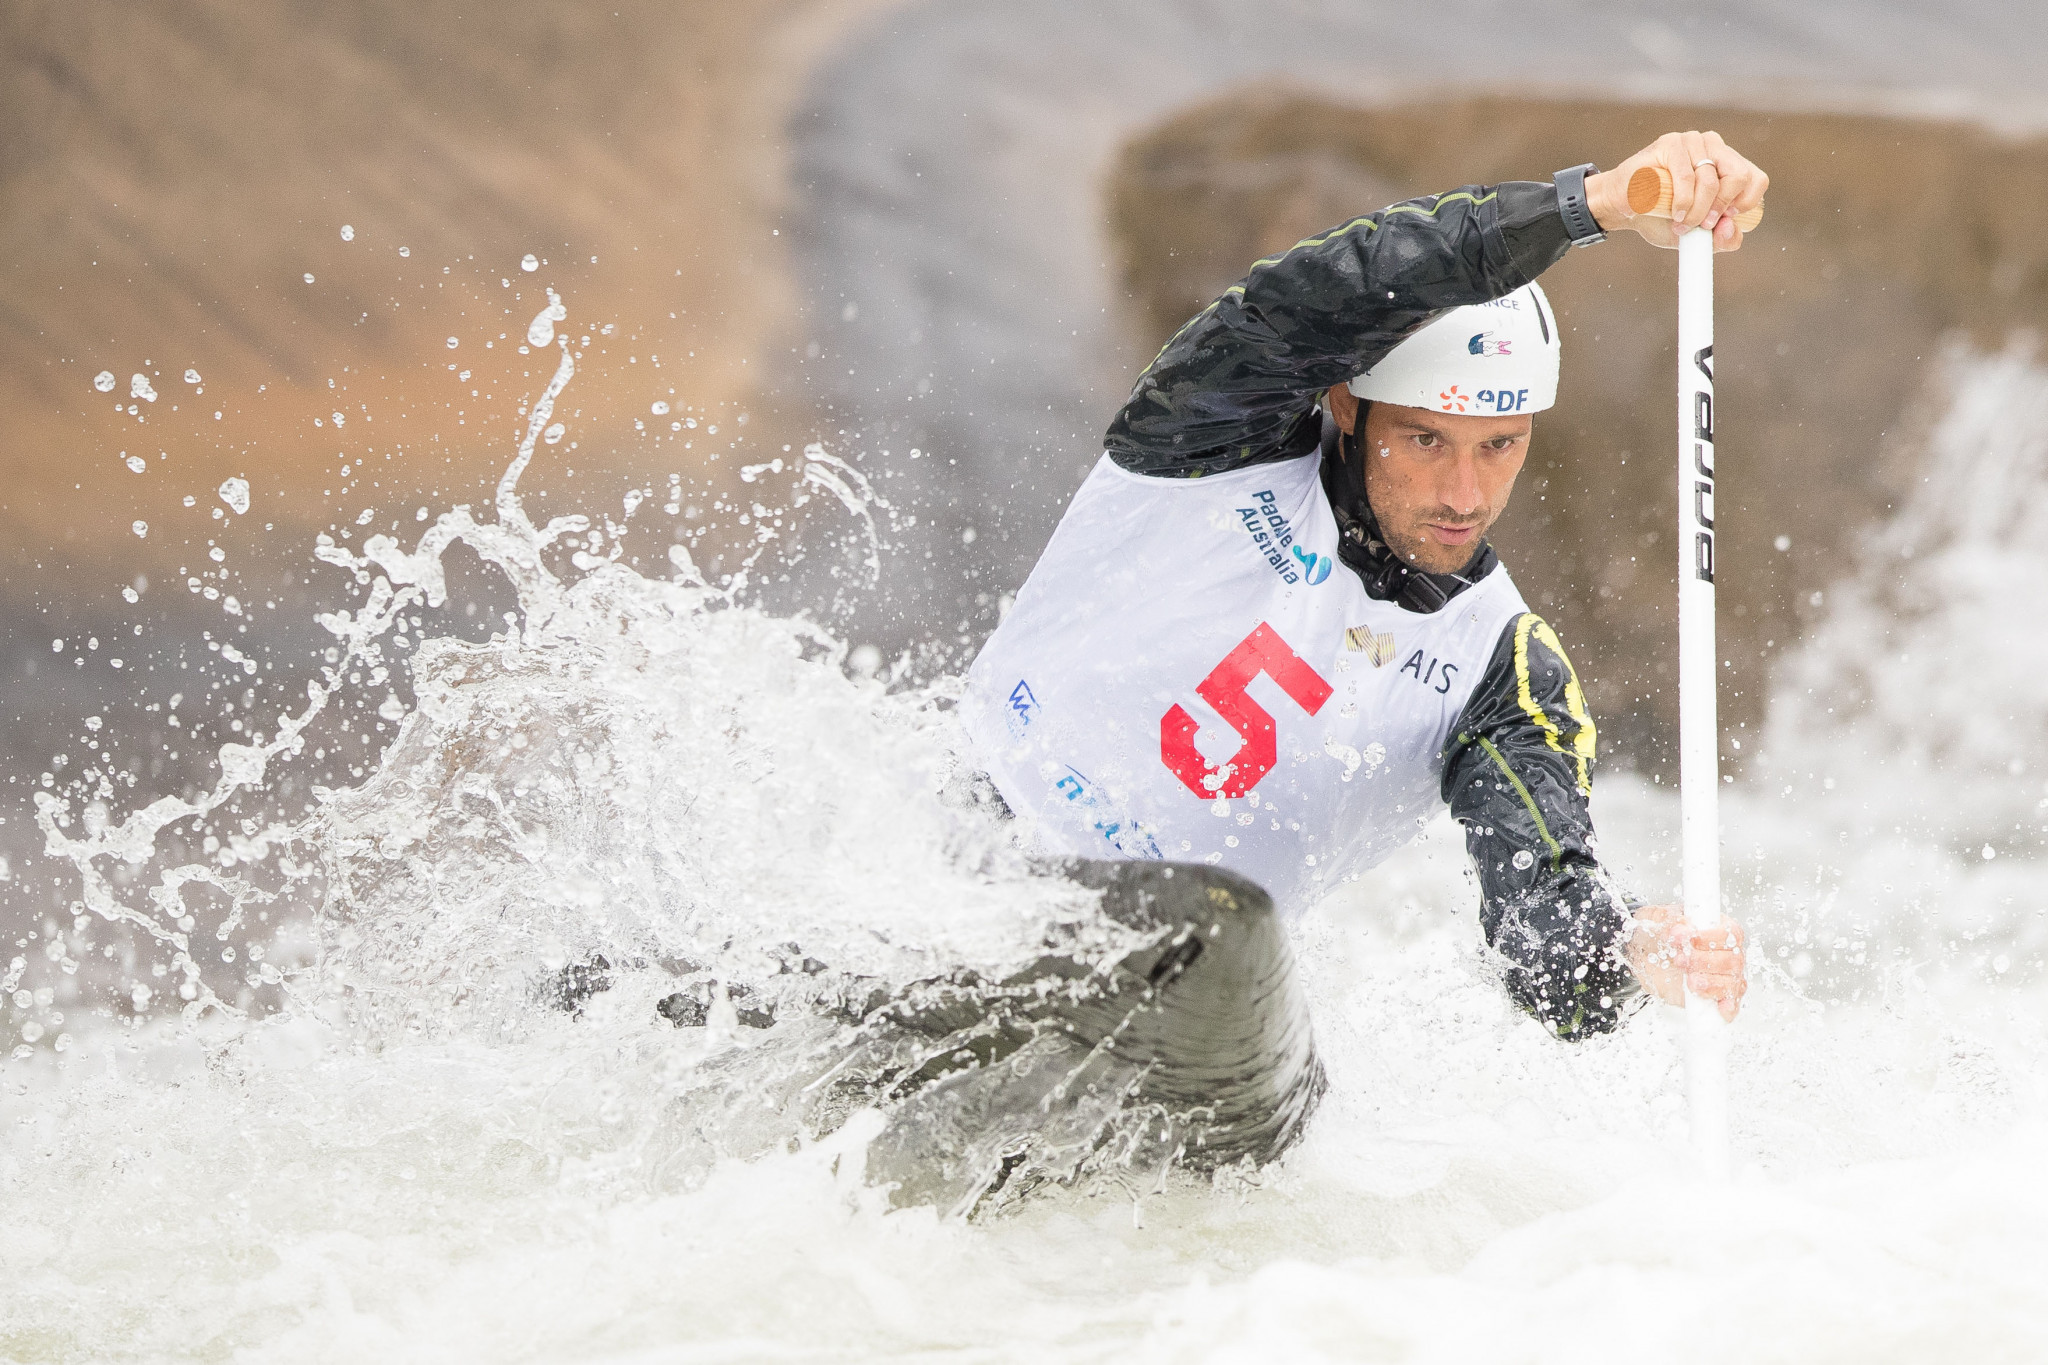 Pau still on course to hold Canoe Slalom World Cup despite French lockdown